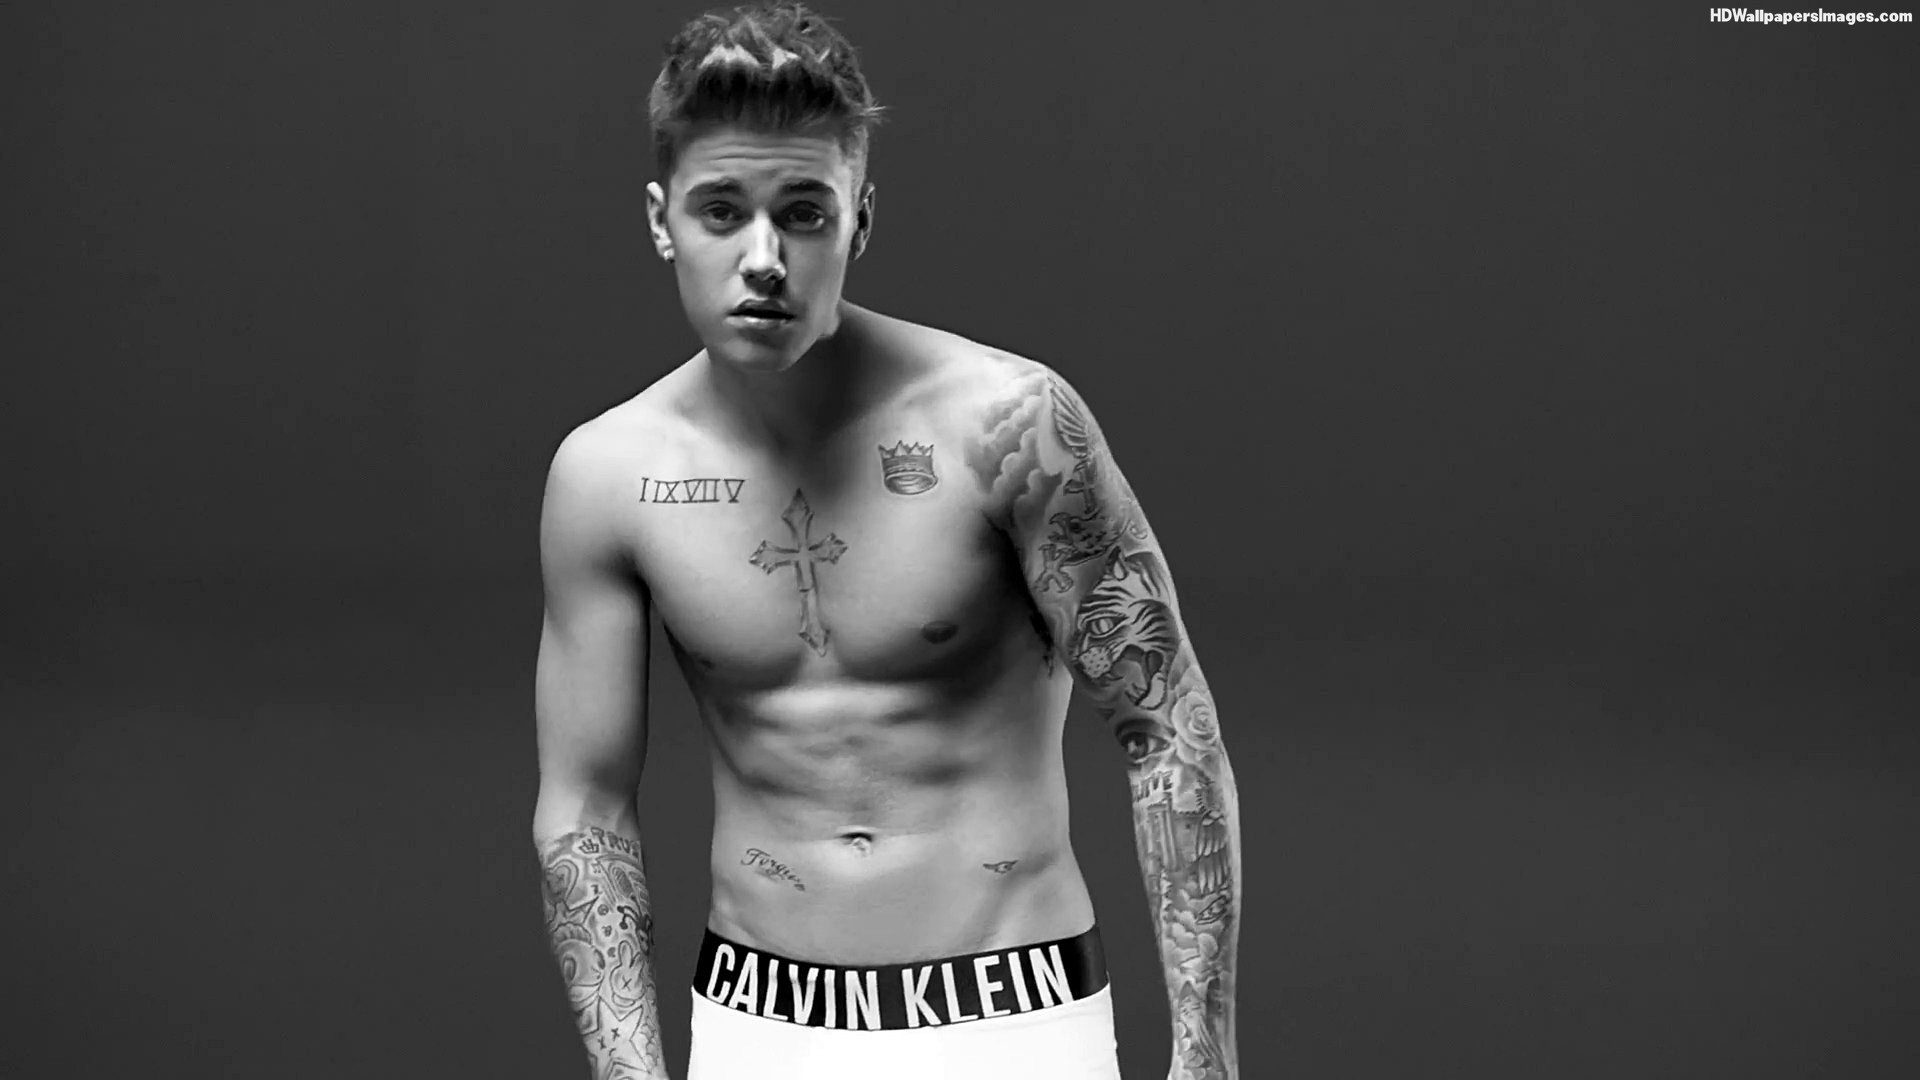 justin bieber 2015 wallpapers, amazing 50 wallpapers of justin